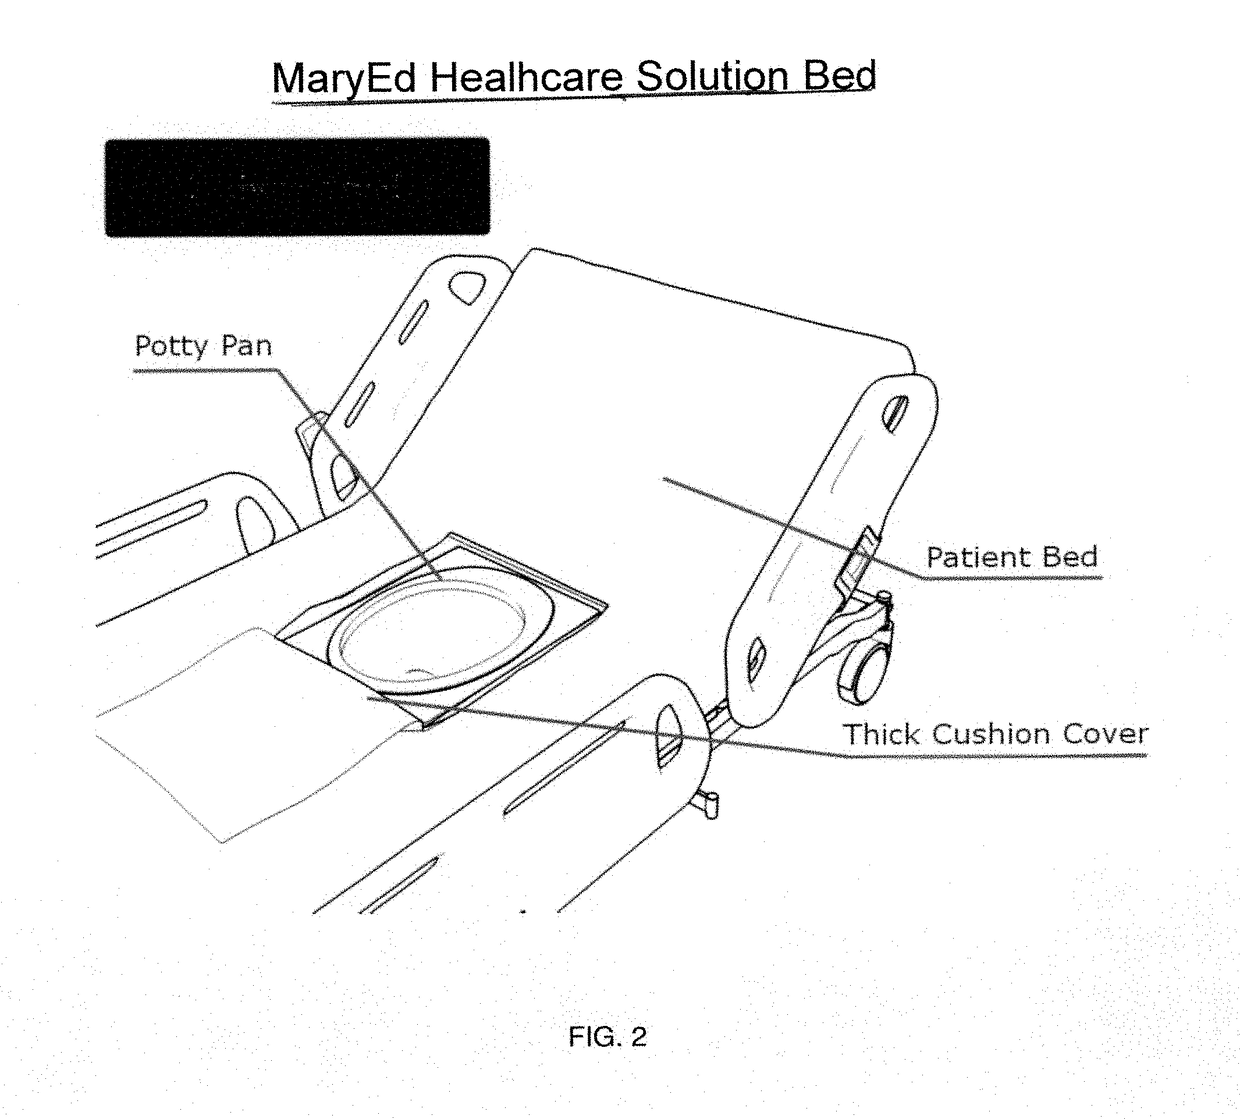 Maryed healthcare solution bed